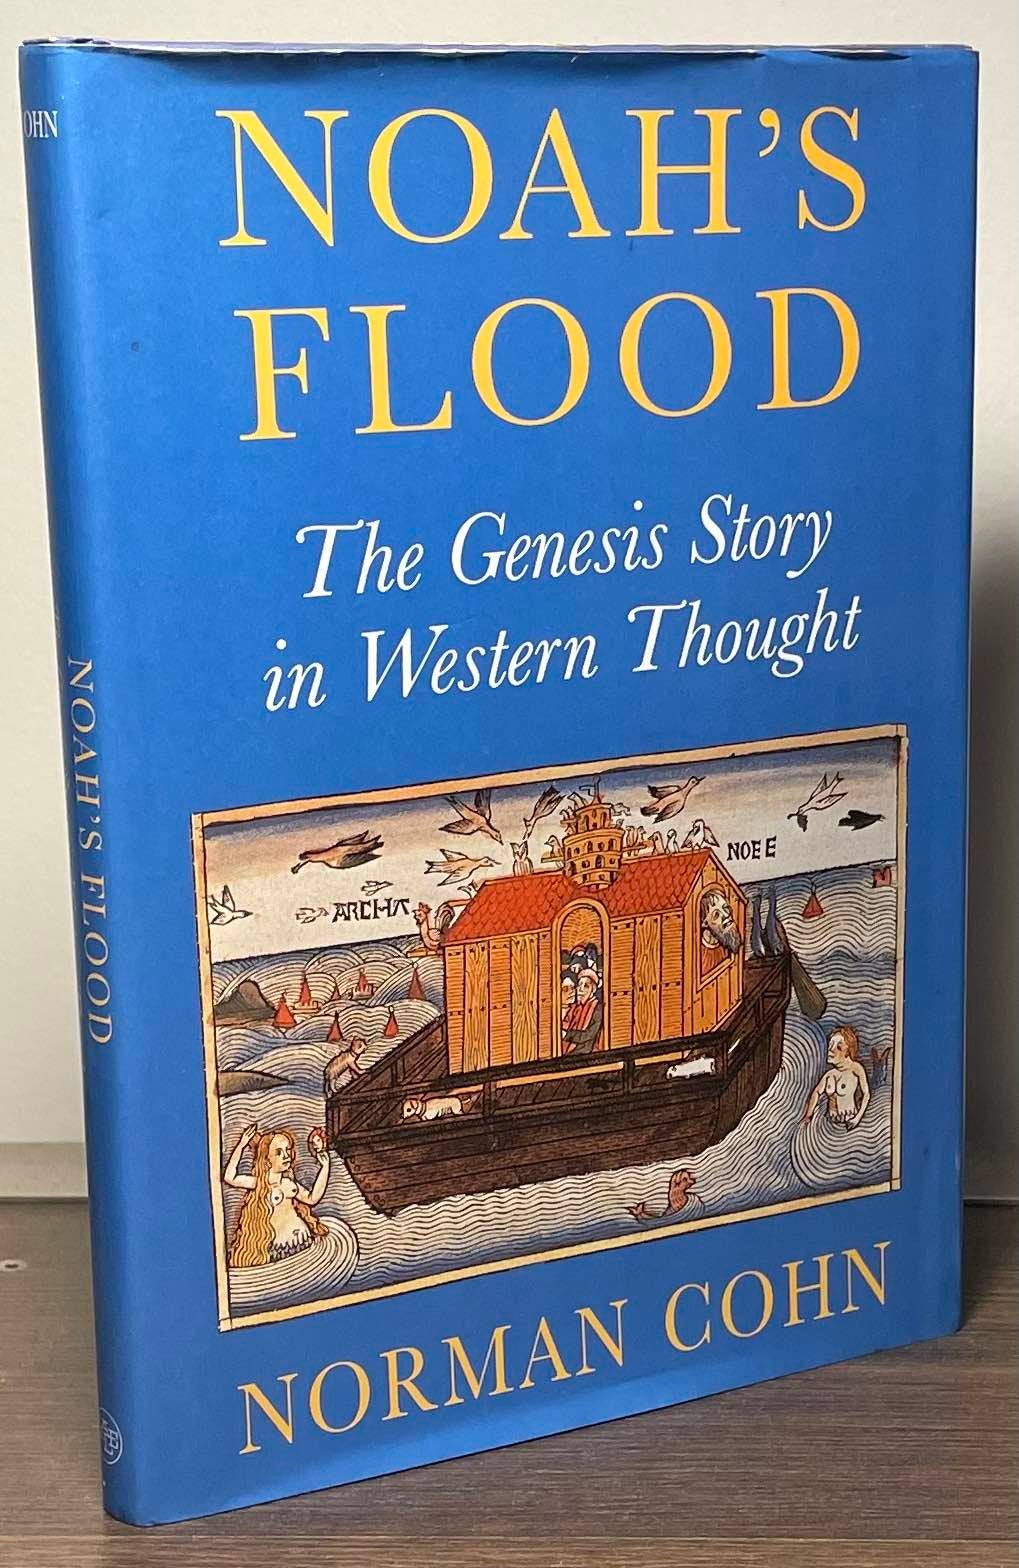 Noahs Flood The Genesis Story In The Western Thought Norman Cohn Clothdust Jacket Octavo